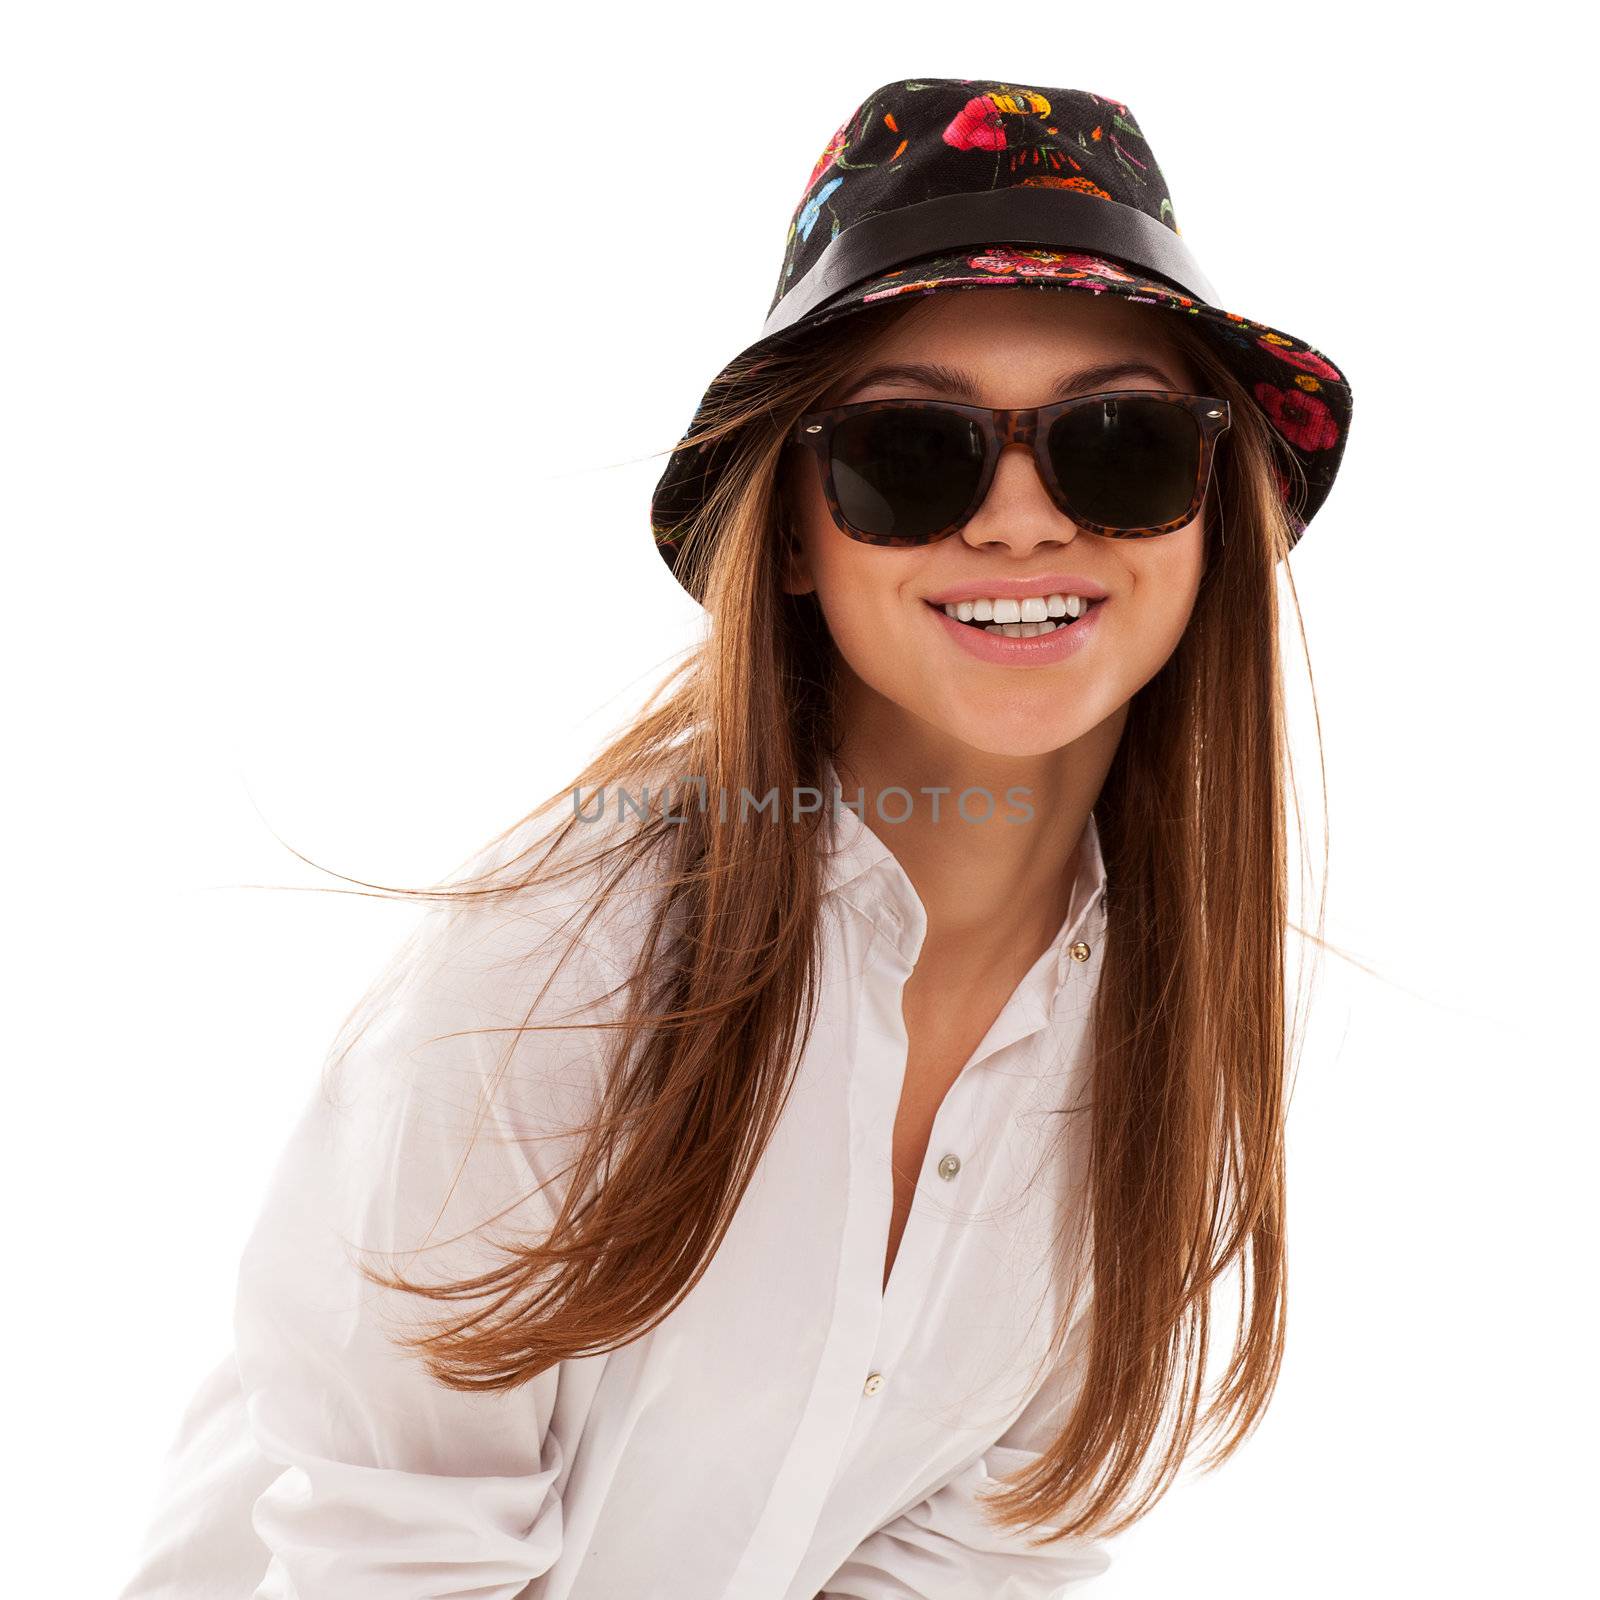 Young attractive woman in squared shirt and sunglasses